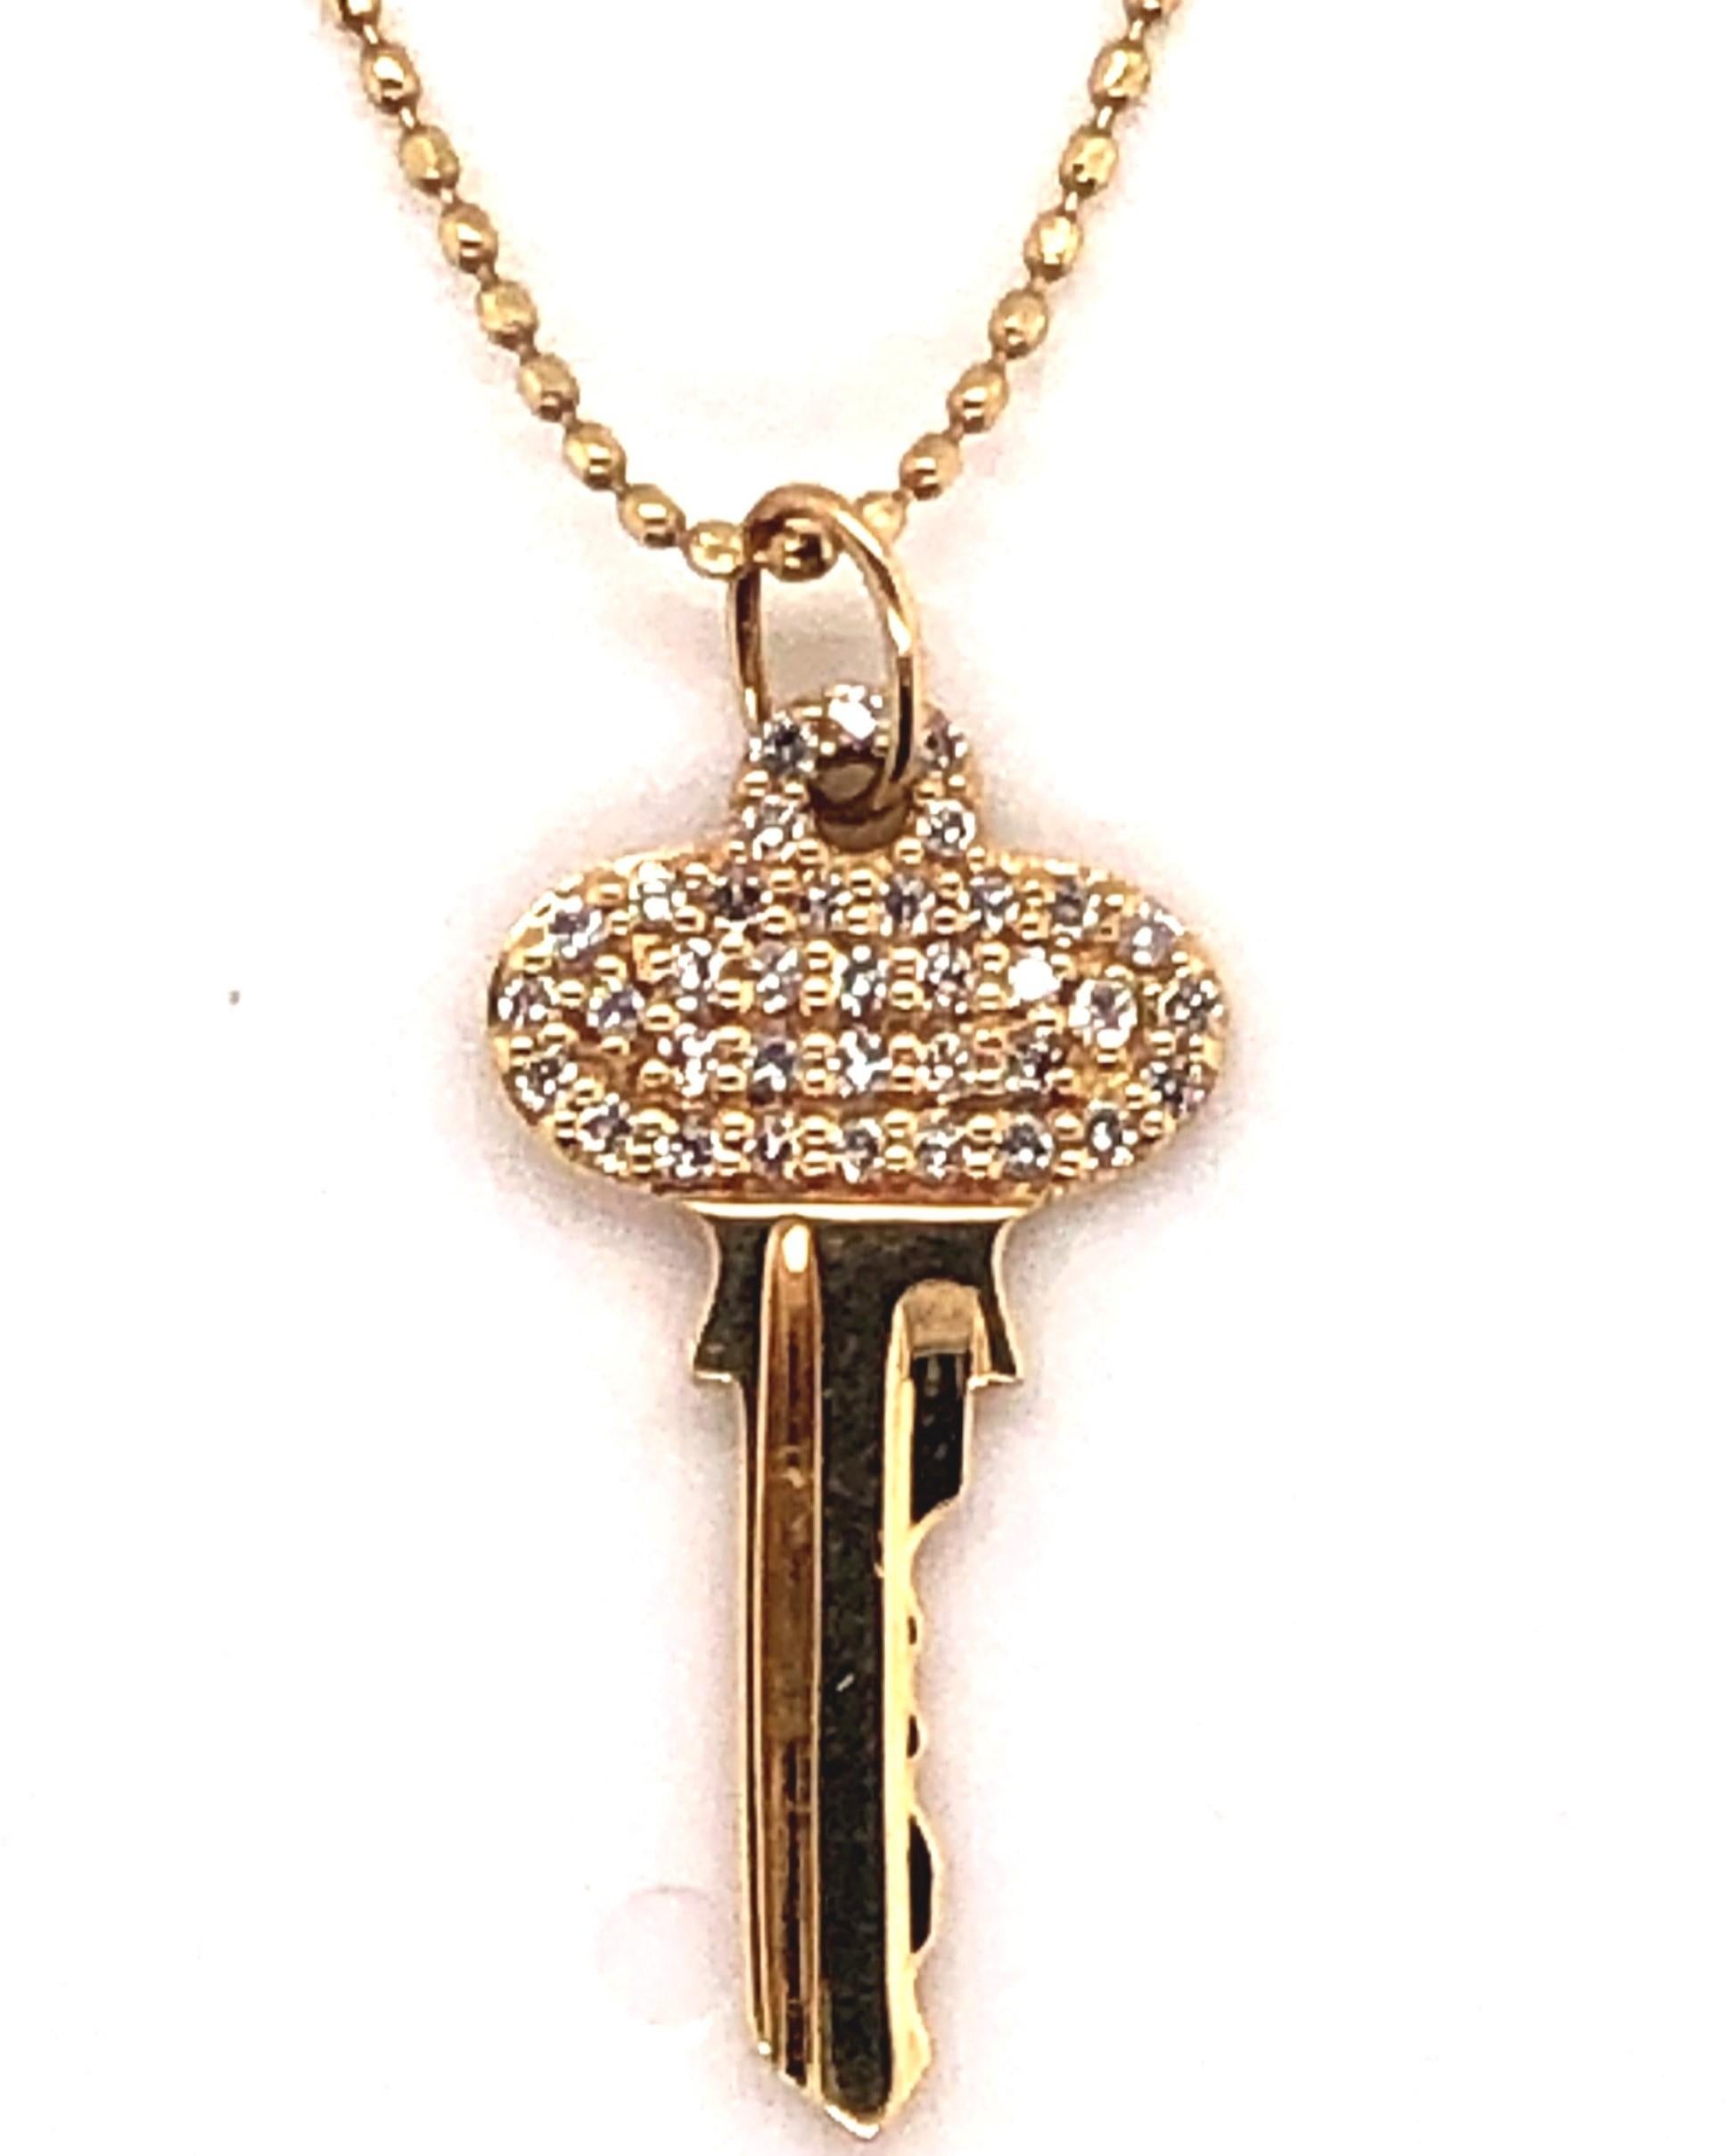 All of these items, the bee, the key, the snake and the necklace chain itself are from Sydney Events collection. All individual items are 14kt yellow gold. The Key contains diamonds, the bee contains white and black diamonds and the snake contains